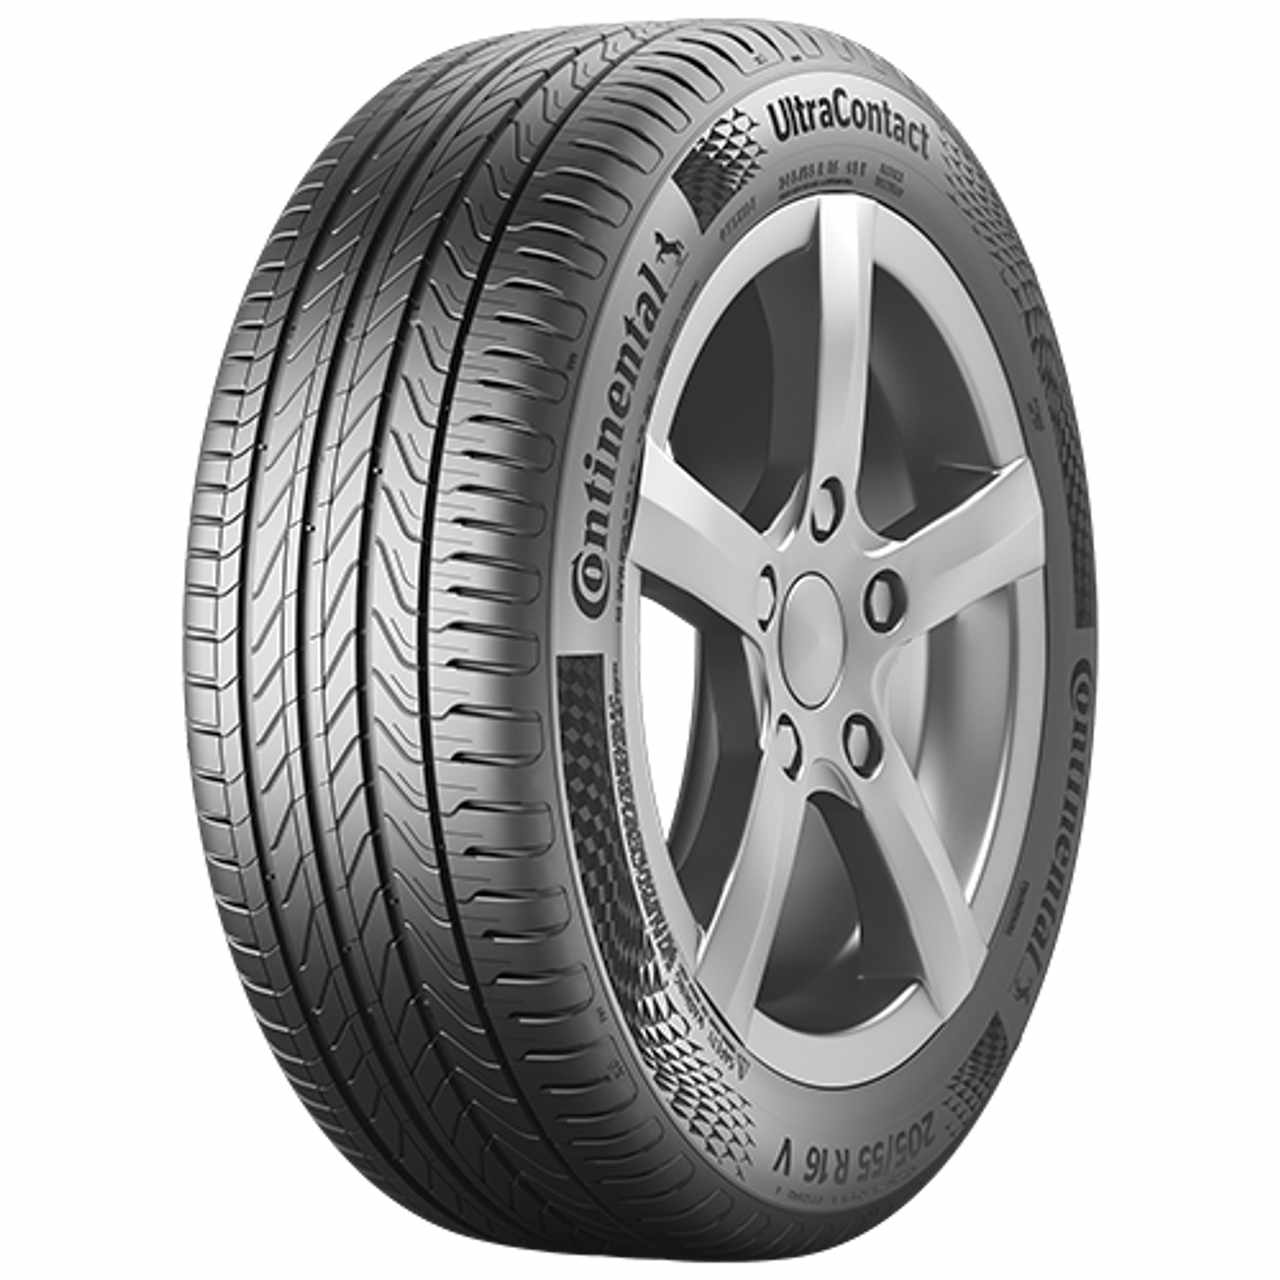 CONTINENTAL ULTRACONTACT (EVc) 195/50R16 84V FR BSW von Continental